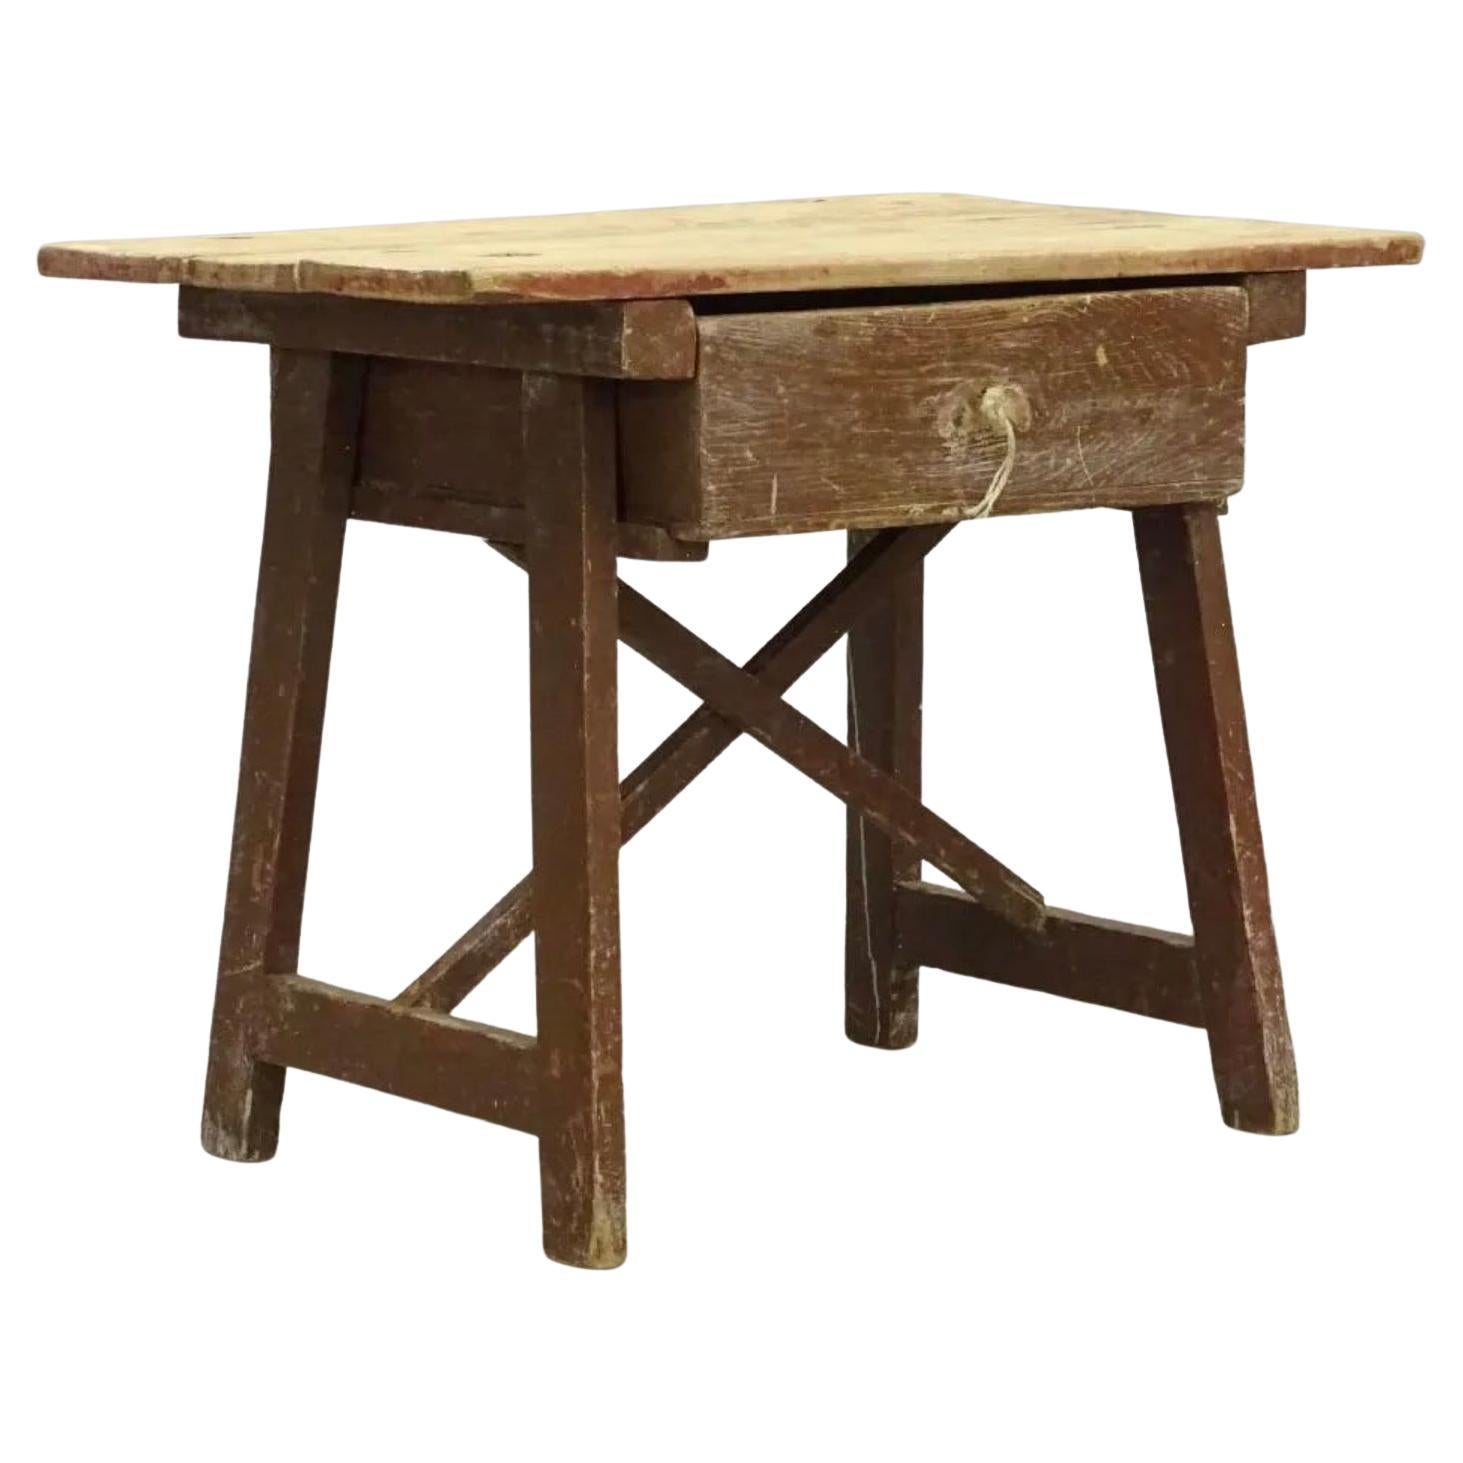 19th Century Rustic Country Accent Table